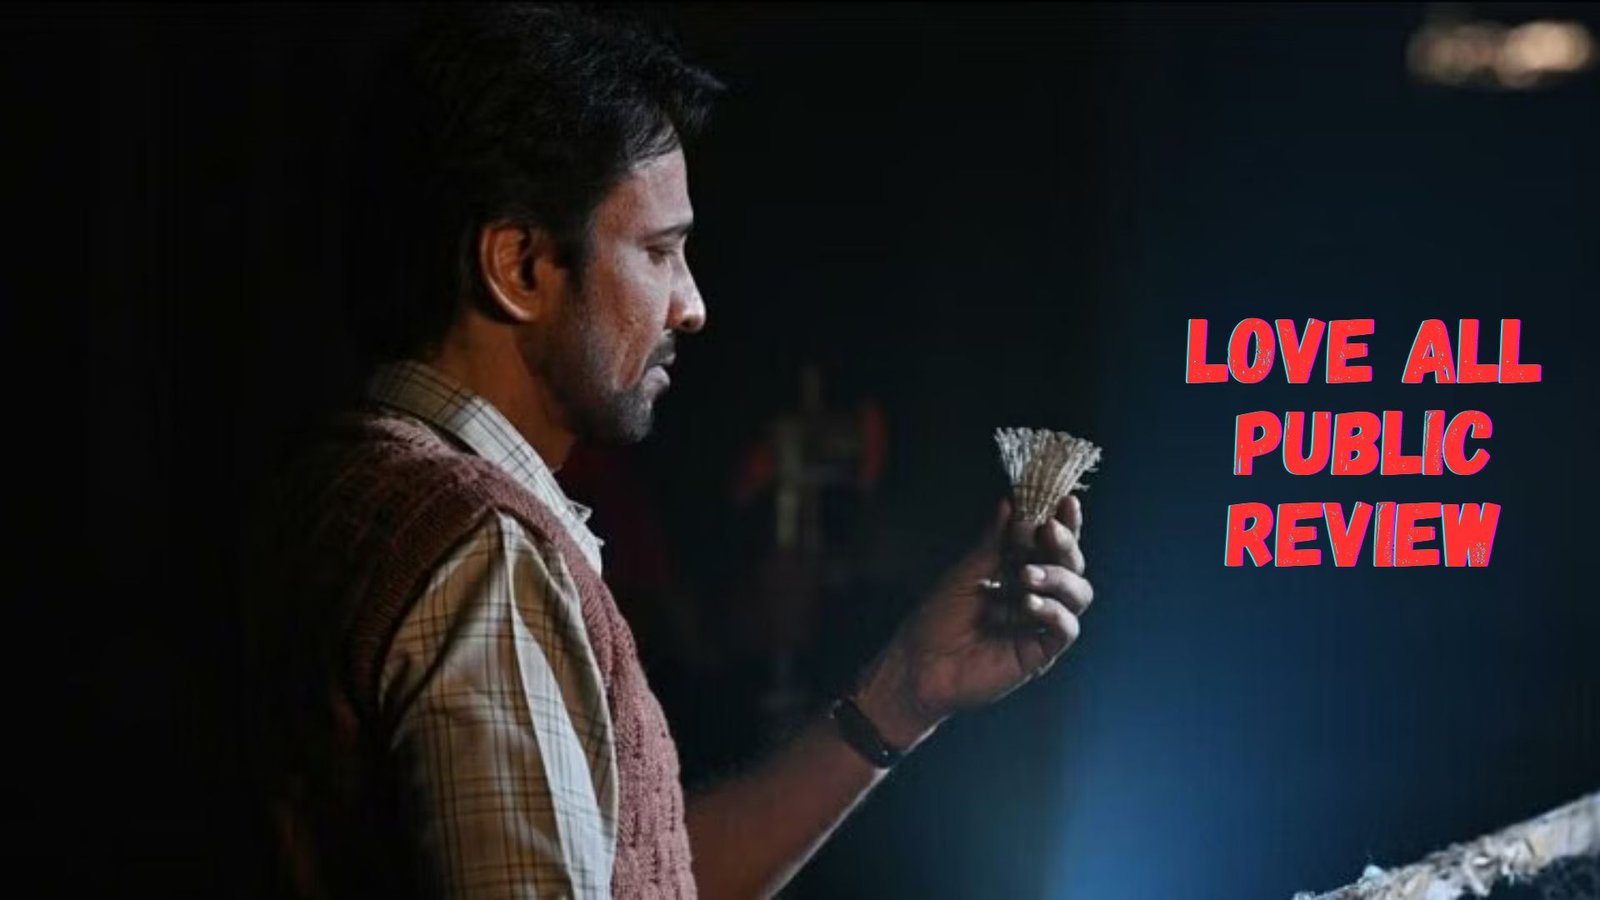 Love all review, a film of k.k Menon